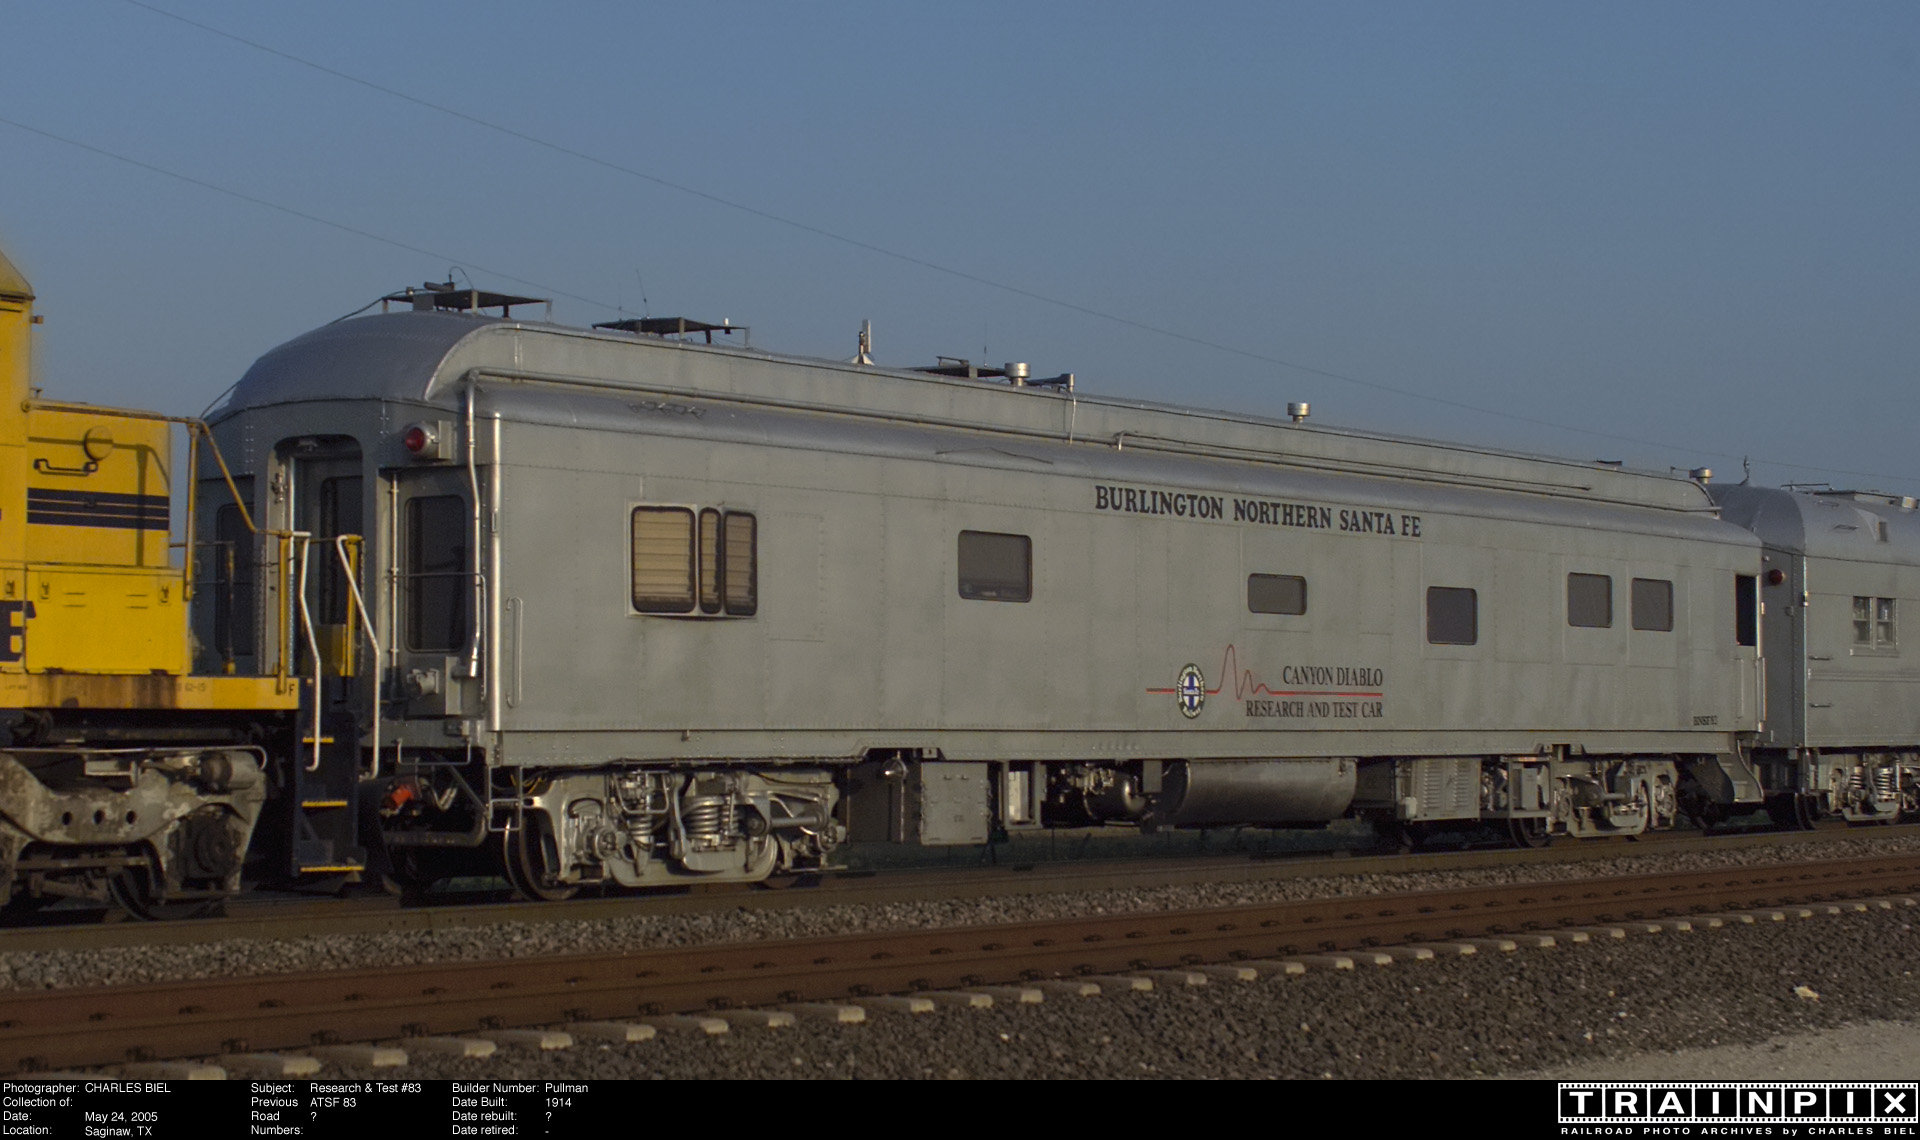 The BNSF Photo Archive Research Test Car 83